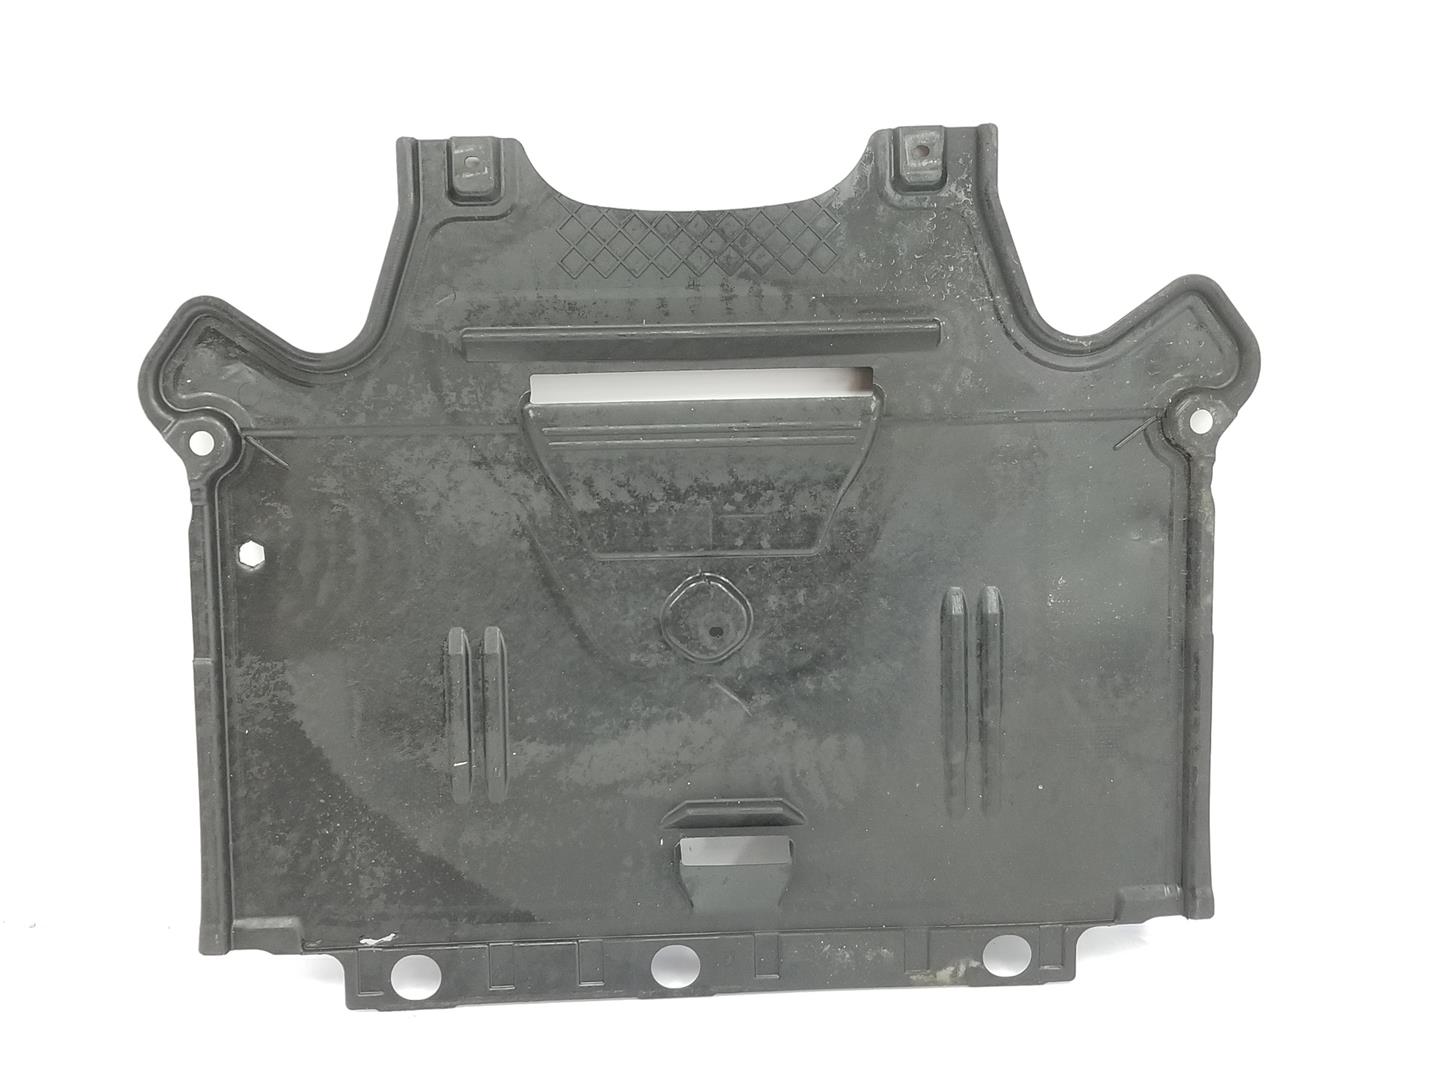 AUDI A5 8T (2007-2016) Front Engine Cover 8K1863822F, 8K1863822F 21073807